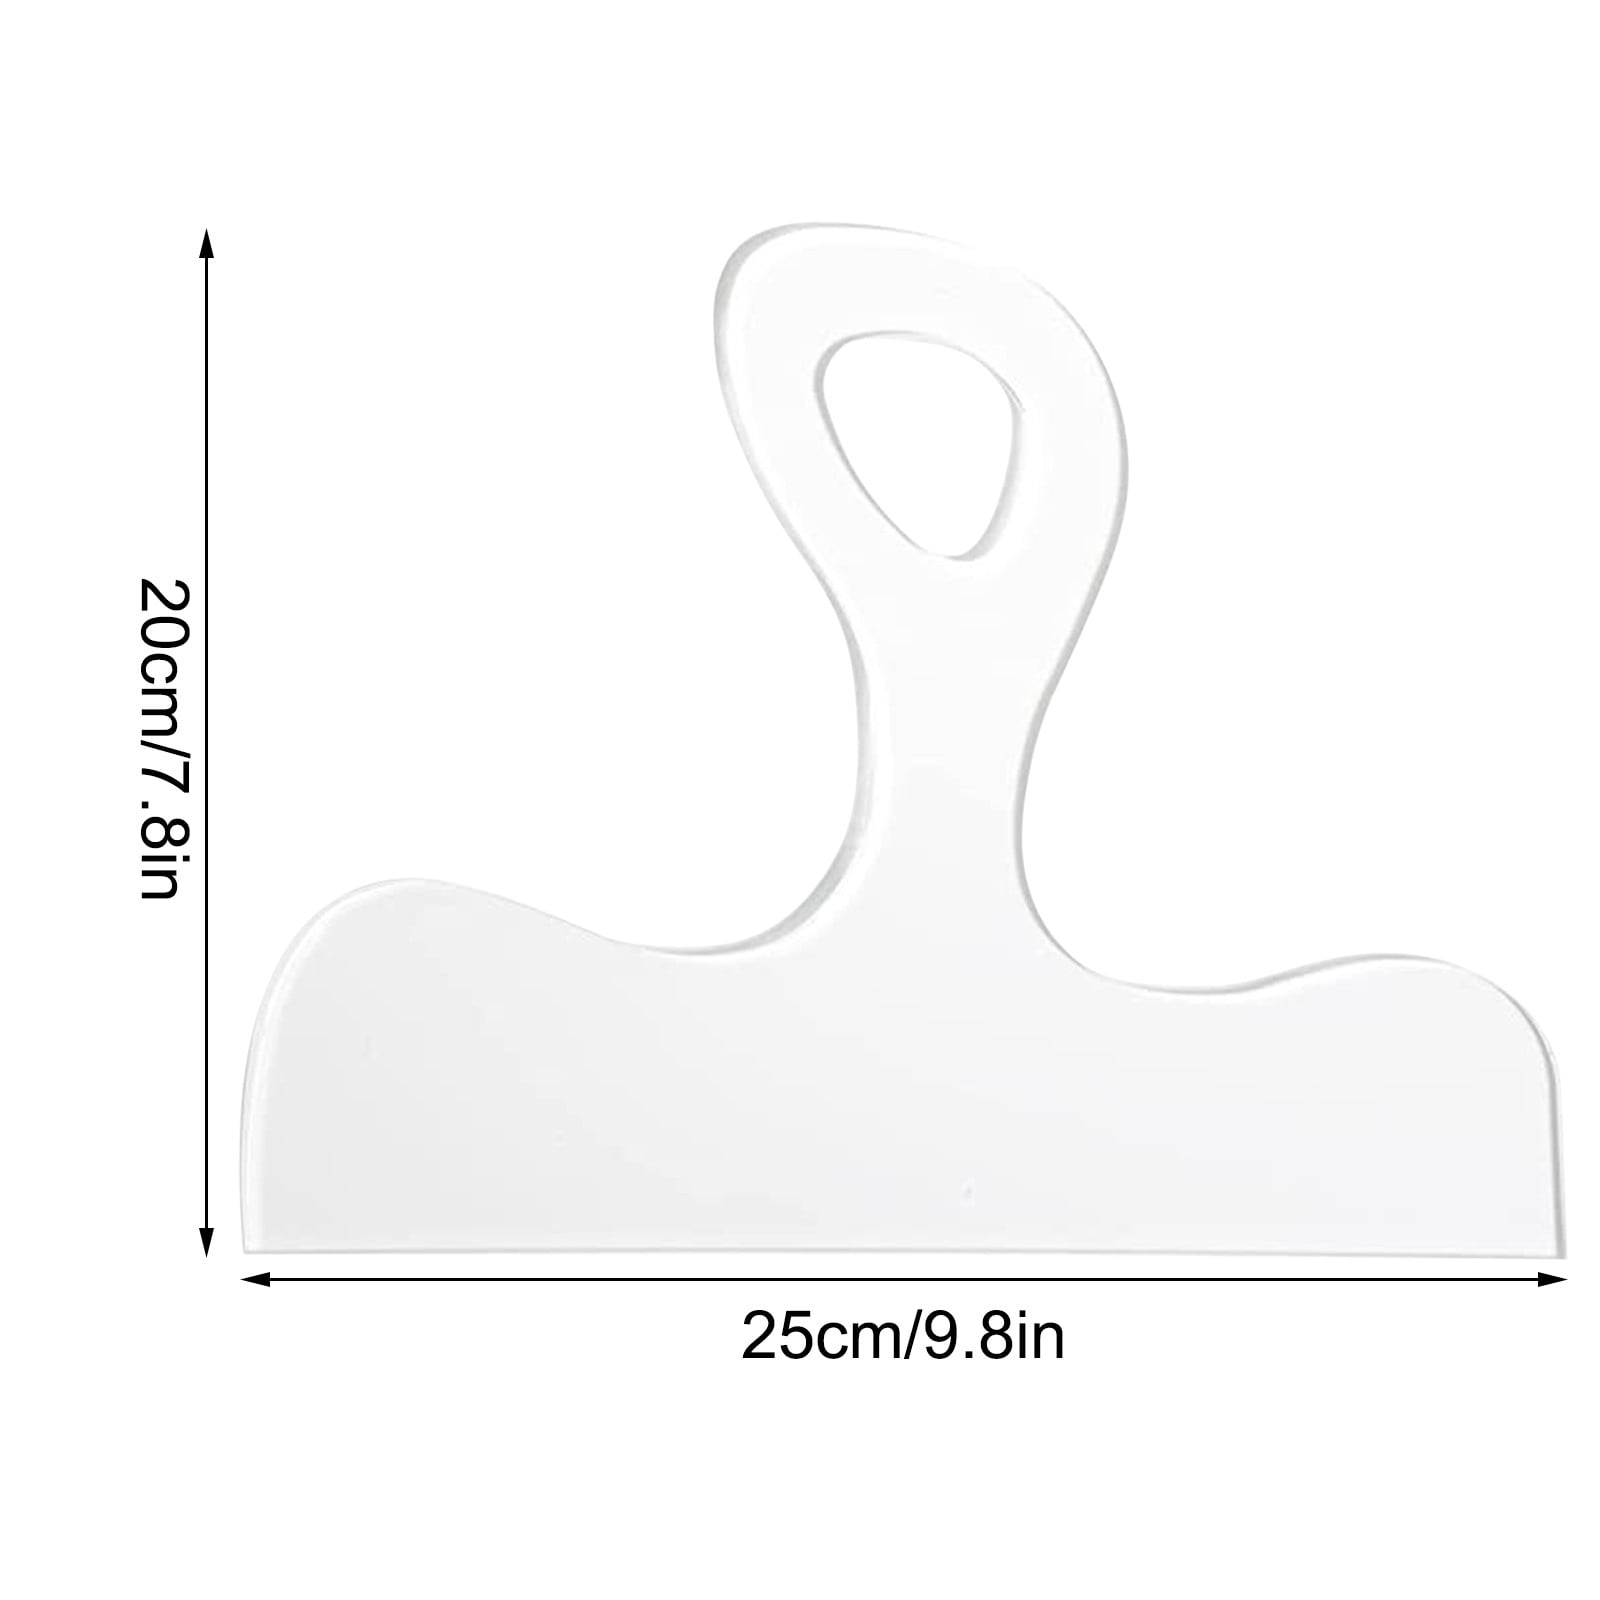 solacol Wood Cutting Board with Handle Template Acrylic Handle Cutting  Board Router Template Angled Curvy Tracing Stencils Guide Tools (8 * 10'')  Cutting Board Wood with Handle 